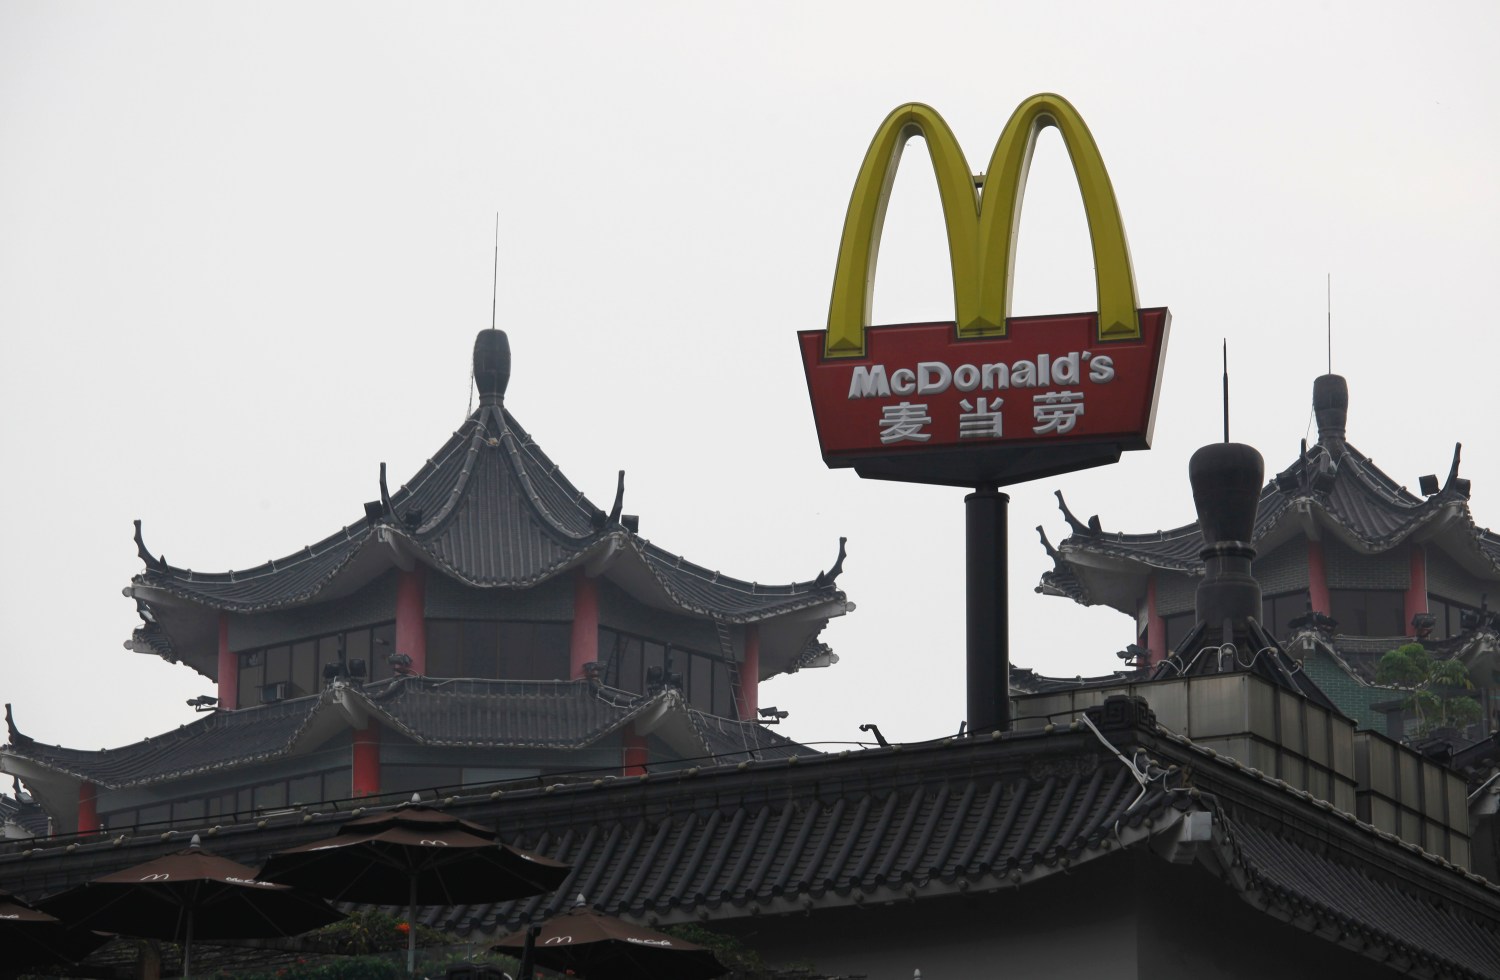 A McDonald's sign is displayed outside its outlet, the first one which opened in China in 1990, at the southern Chinese city of Shenzhen neighbouring Hong Kong March 18, 2013. McDonald's Corp gave away more than a million breakfast McMuffins across China on Monday, a few days after Chinese state television aired its annual expose on corporate malpractice to mark World Consumer Rights Day. The promotion, the U.S. fast food chain says, was purely coincidental. REUTERS/Bobby Yip (CHINA - Tags: FOOD BUSINESS LOGO POLITICS SOCIETY) - RTR3F51T